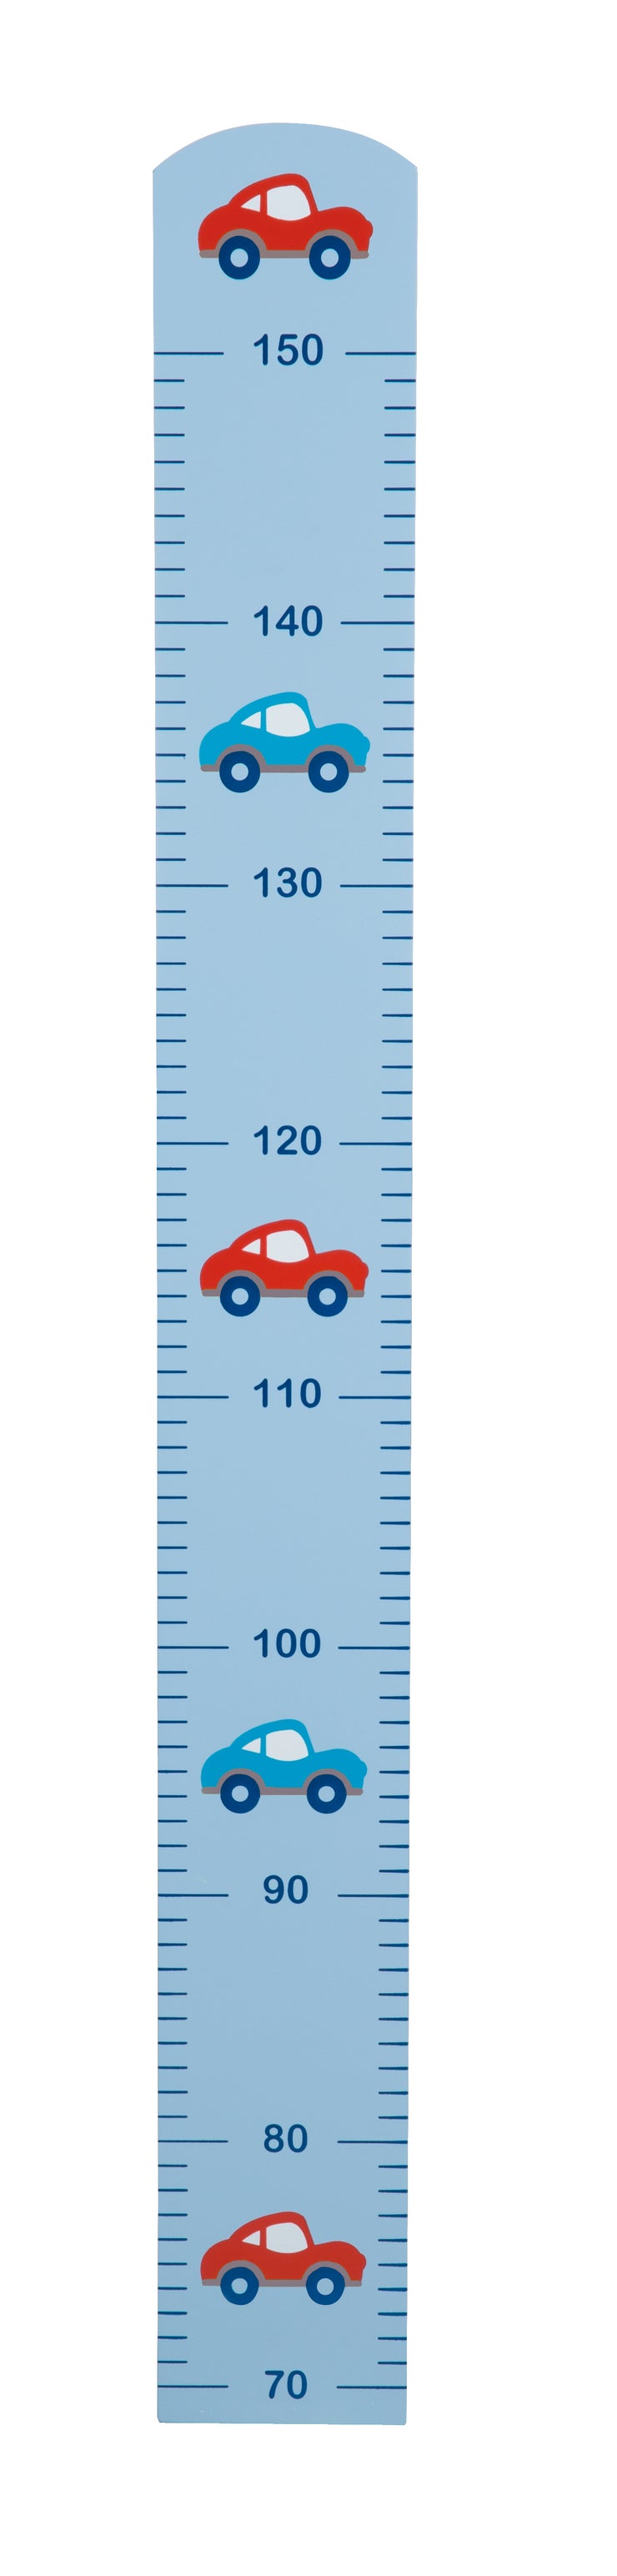 Growth ruler 'Rennfahrer' with car motif, scale up to 150 cm for children, wood, painted blue